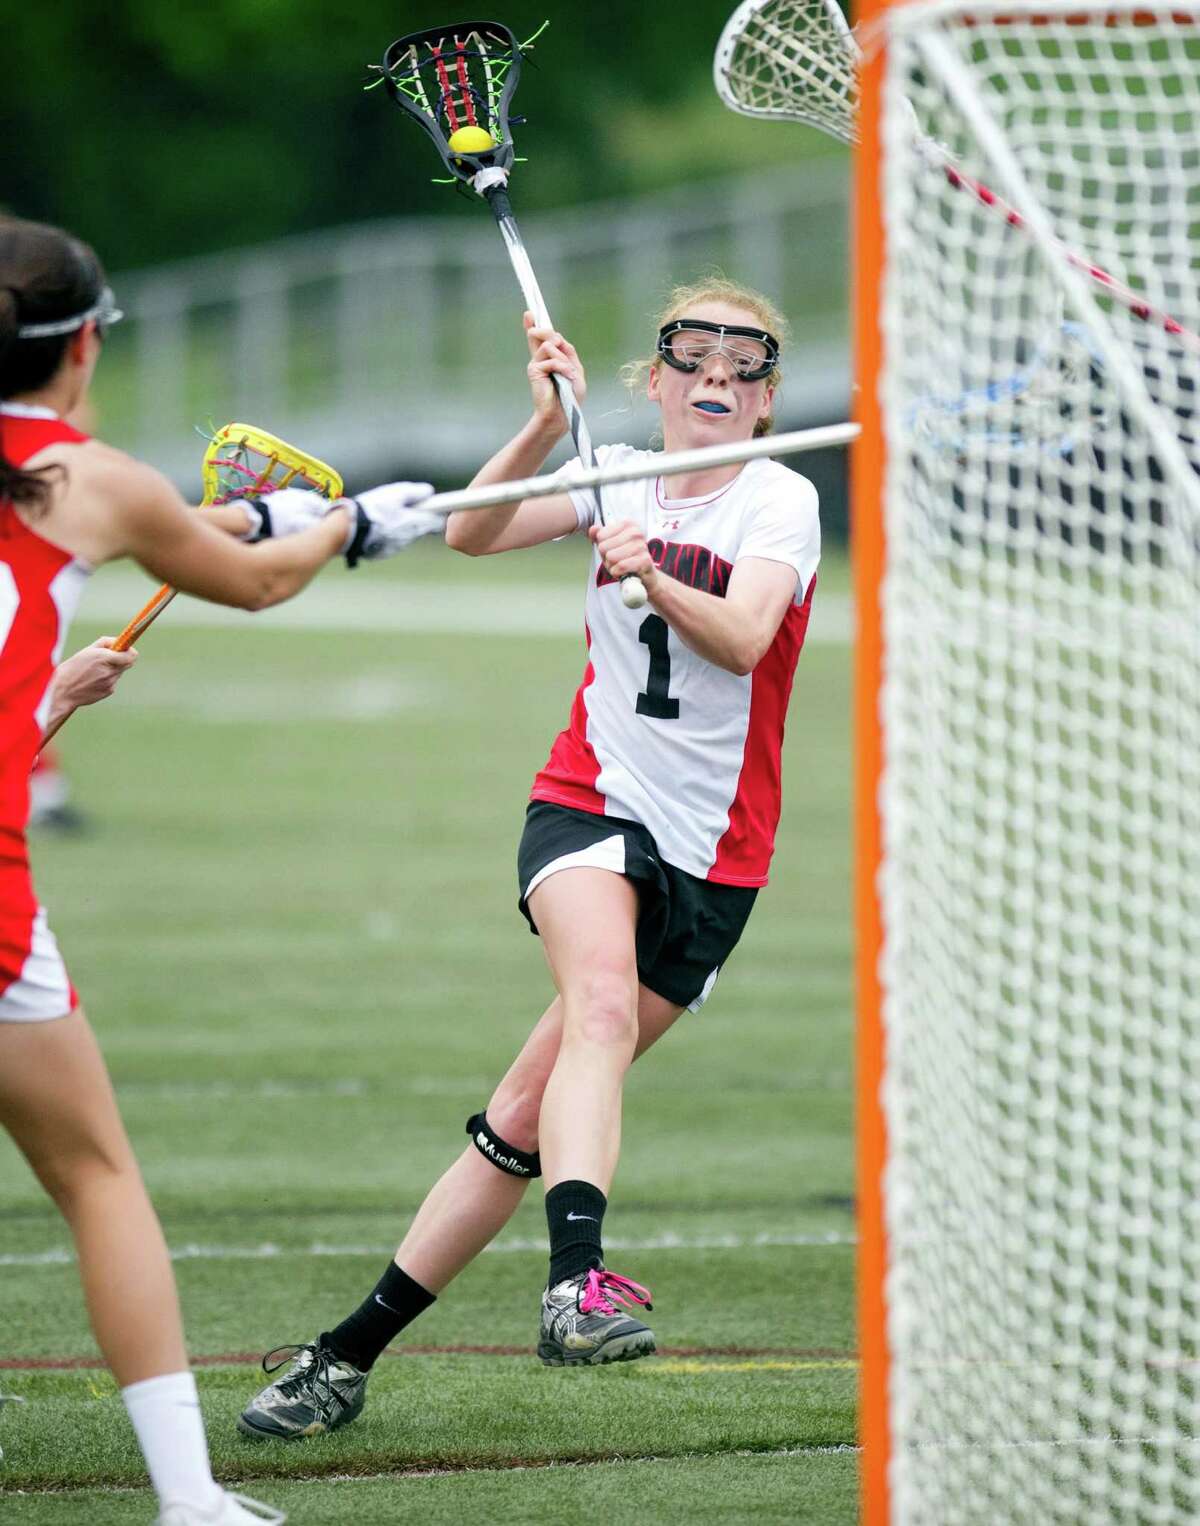 Elizabeth Miller scores a goal during Saturday's girls lacrosse game at New Canaan High School against Fox Lane on May 11, 2013.